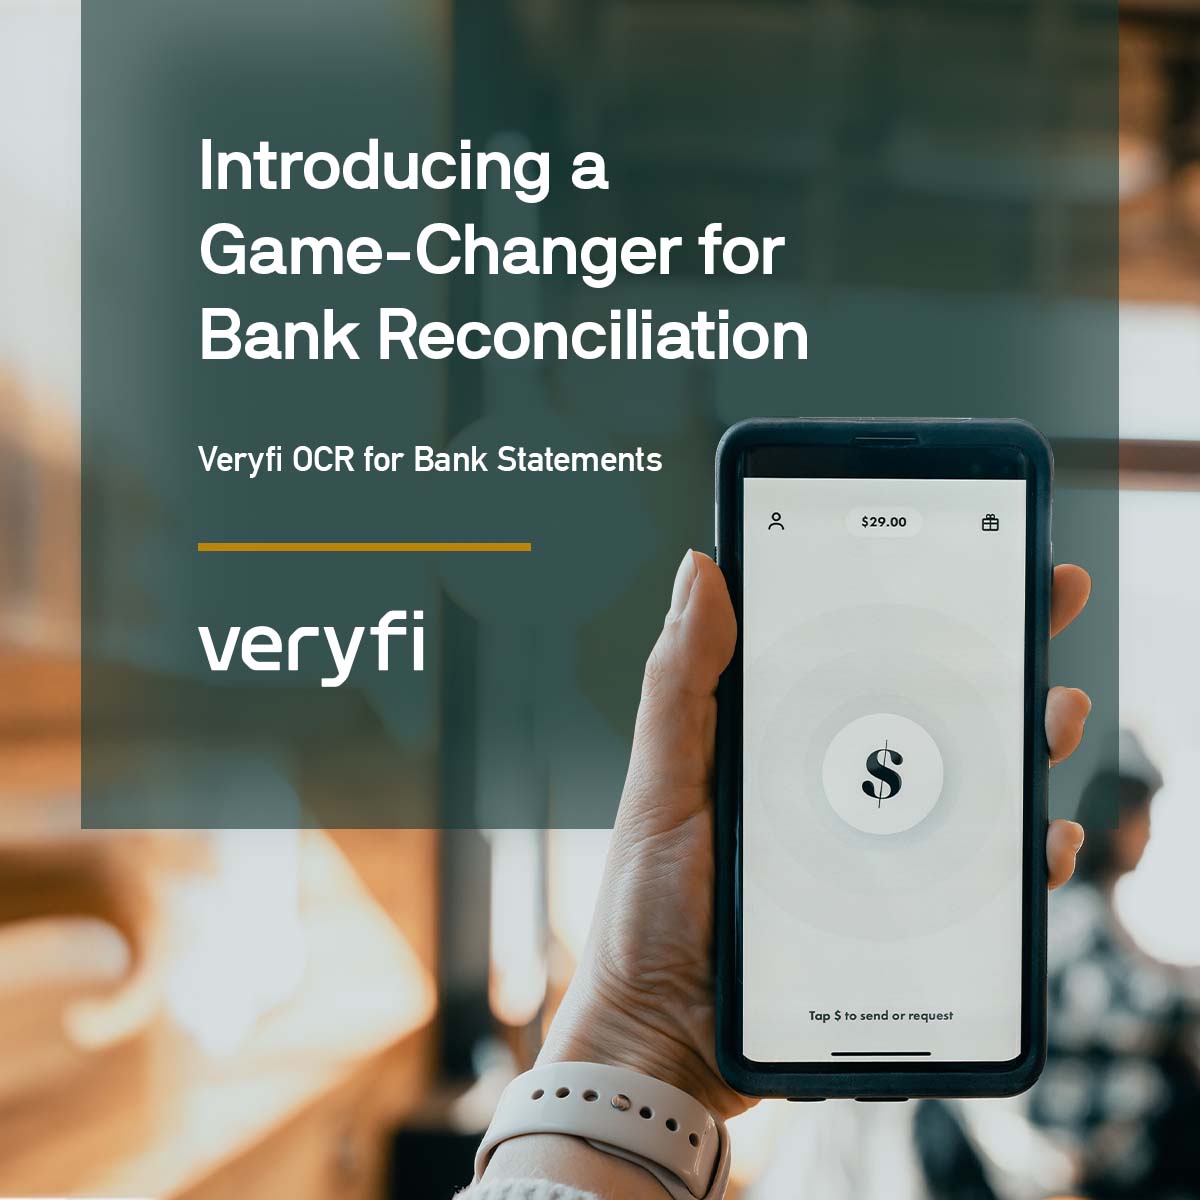 Introducing a Game-Changer for Bank Reconciliation: Veryfi OCR for Bank Statements